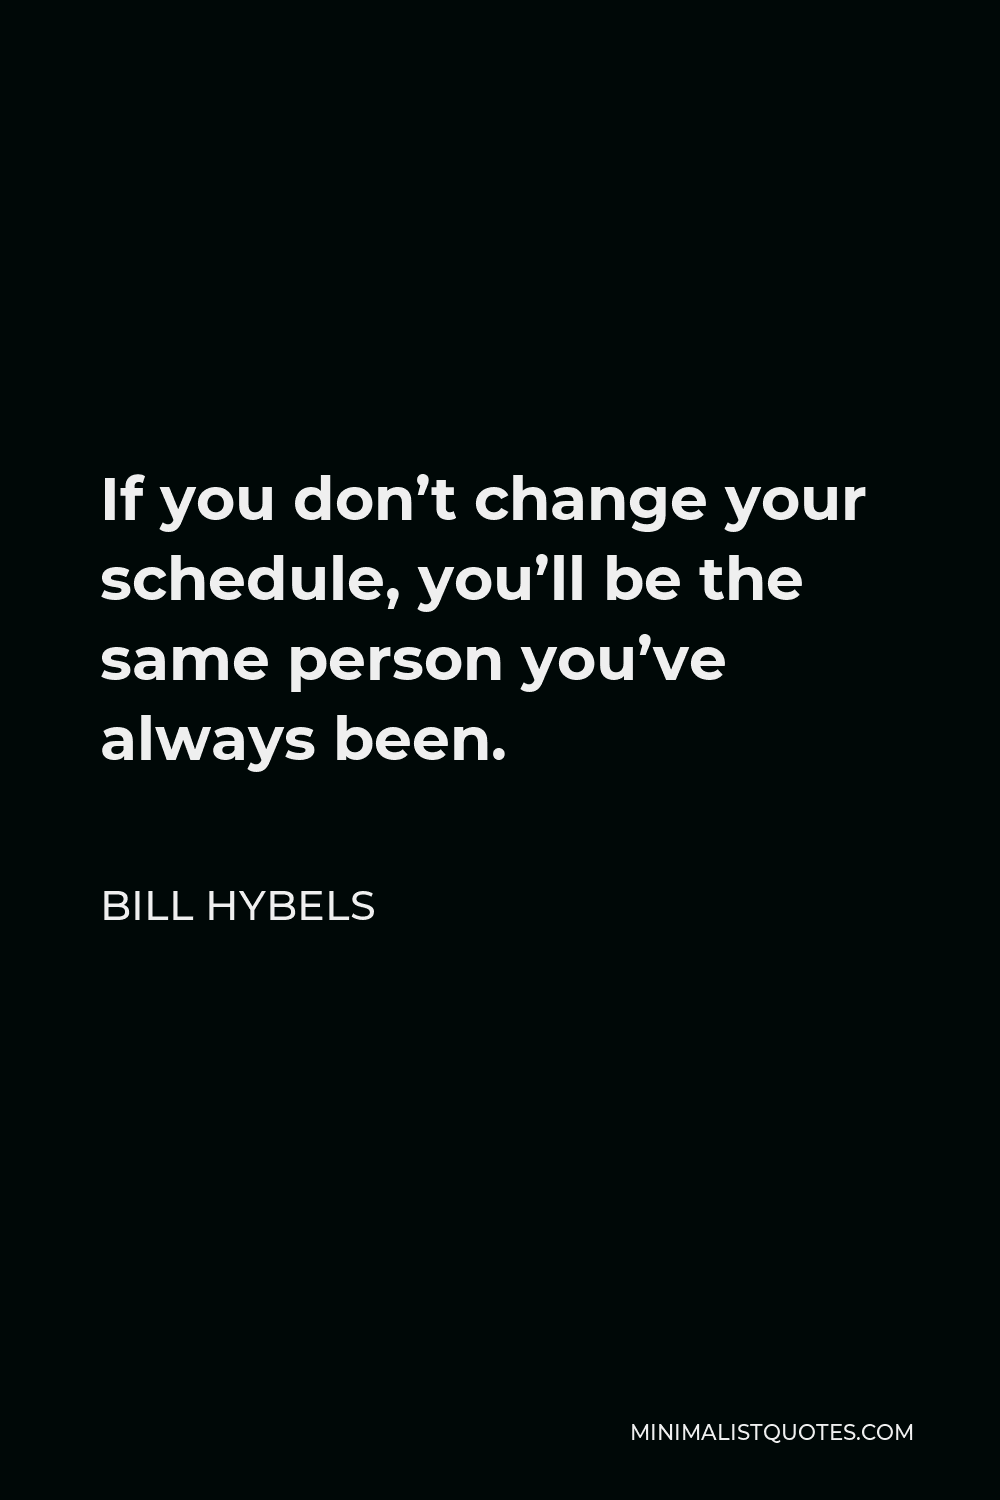 Bill Hybels Quote - If you don’t change your schedule, you’ll be the same person you’ve always been.